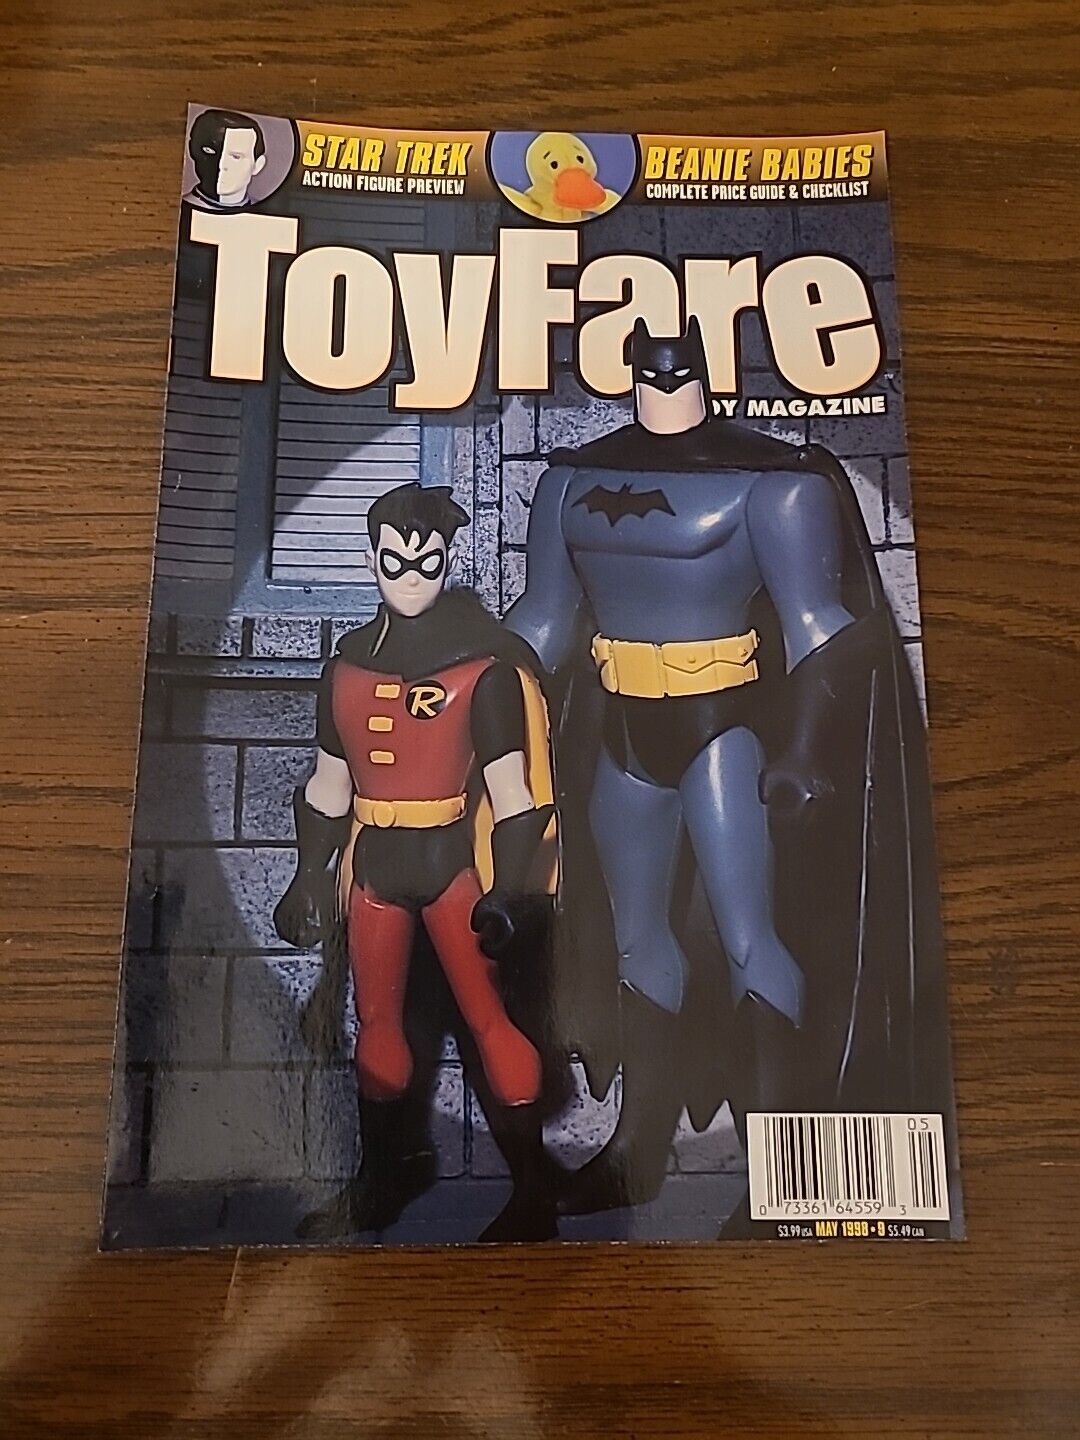 Batman And Robin Action Figures 1998 Magazine Cover Only Print Ad 1998 7x10 